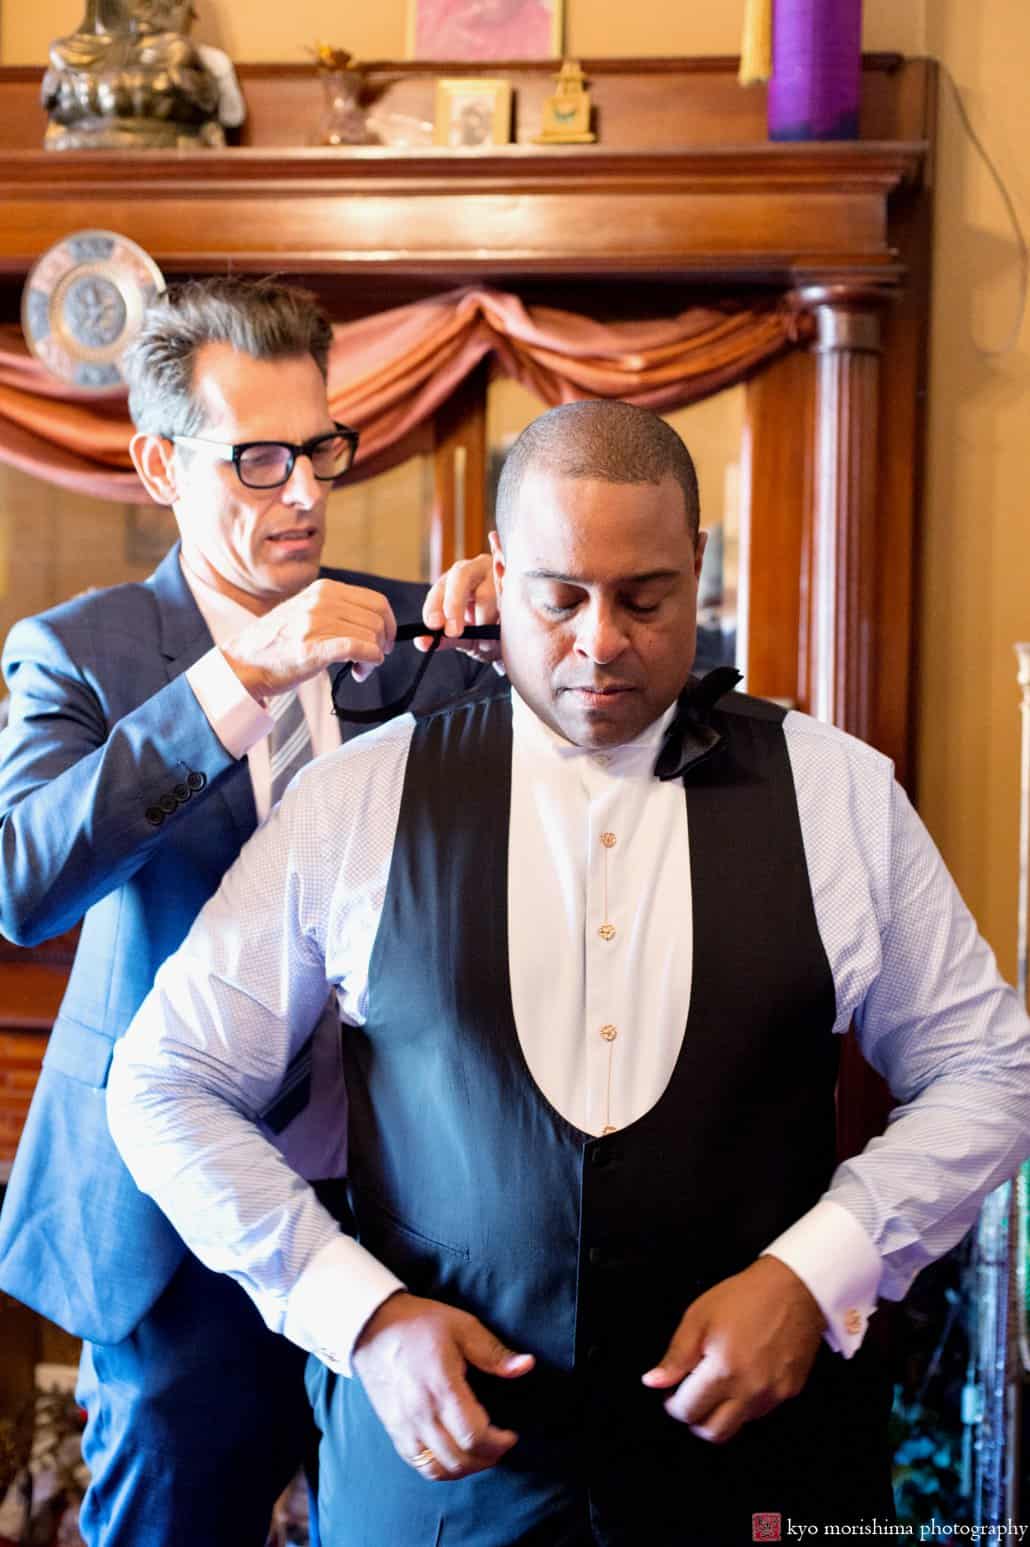 Friend helps groom get ready in his Harlem brownstone, photographed by Carlo Cipriani for Kyo Morishima Photography